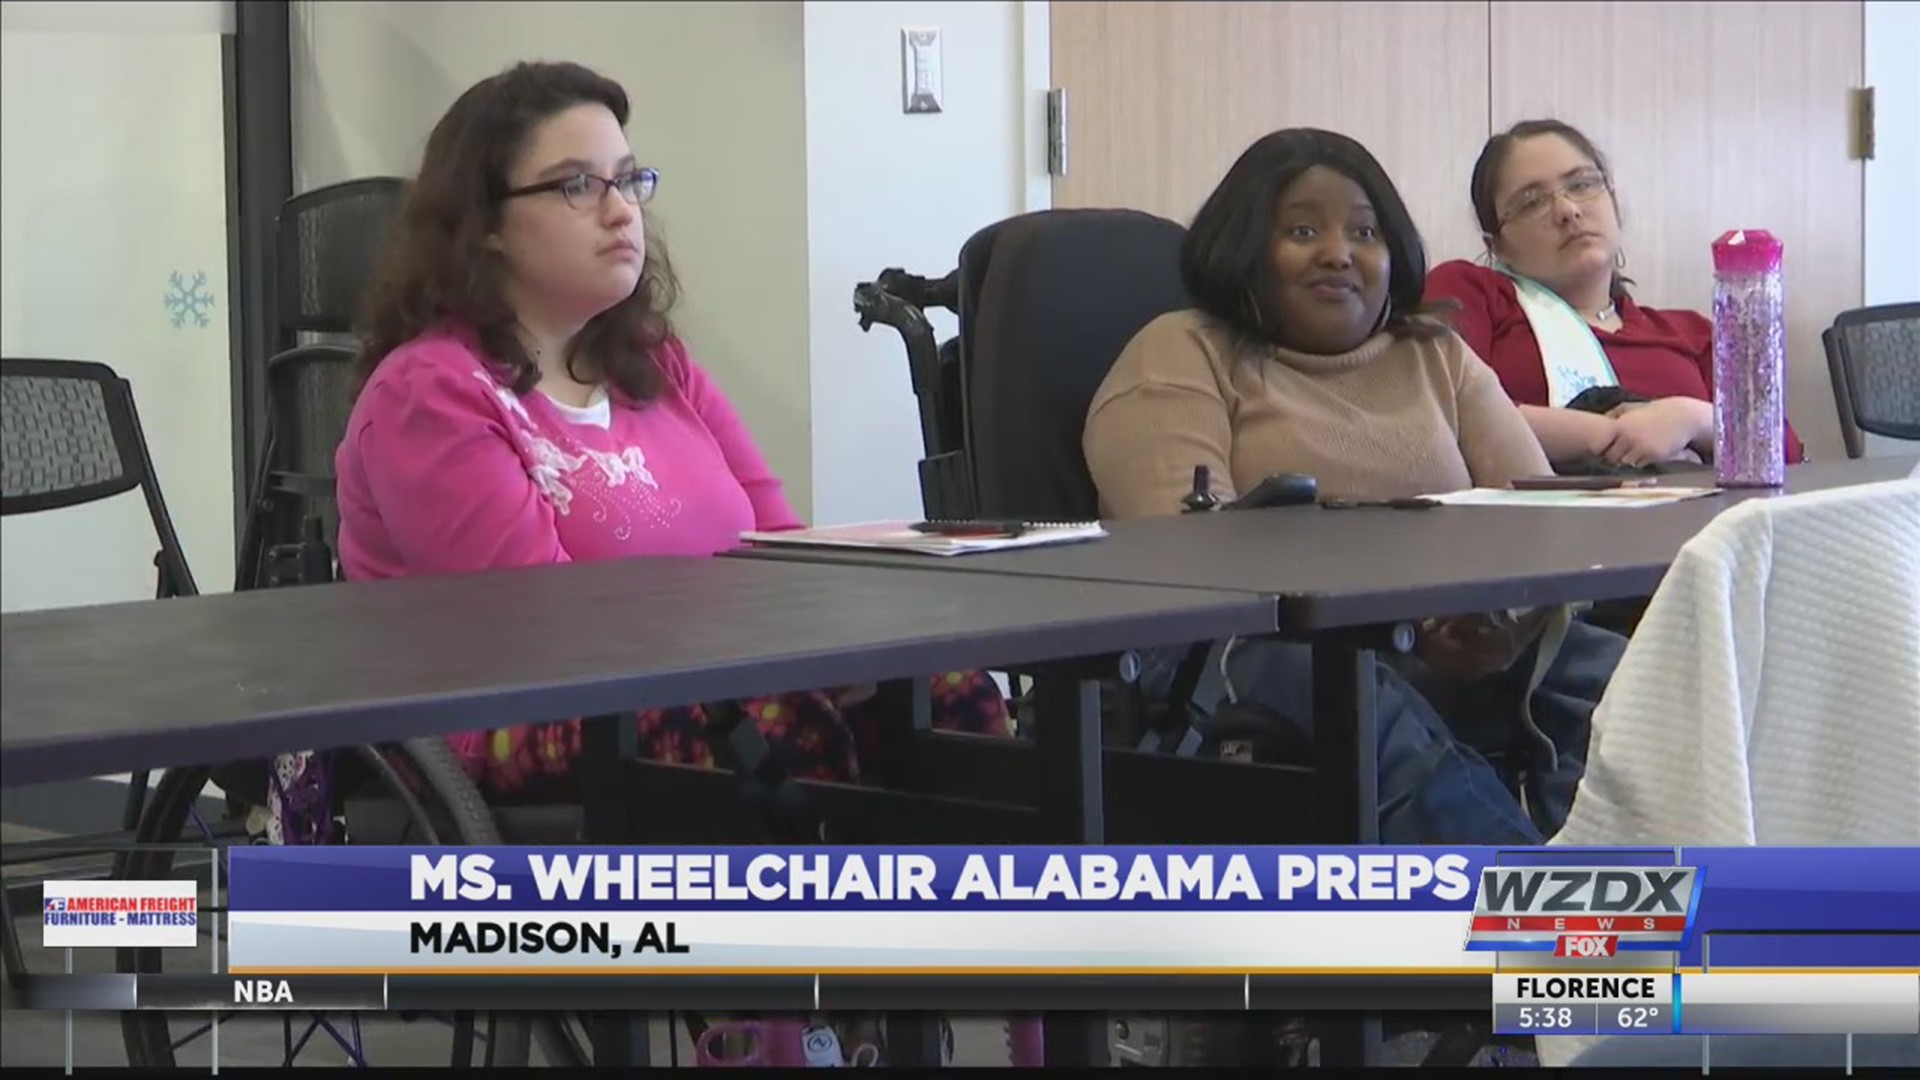 Contestants are prepping to compete for the Ms. Wheelchair Alabama crown Saturday night.